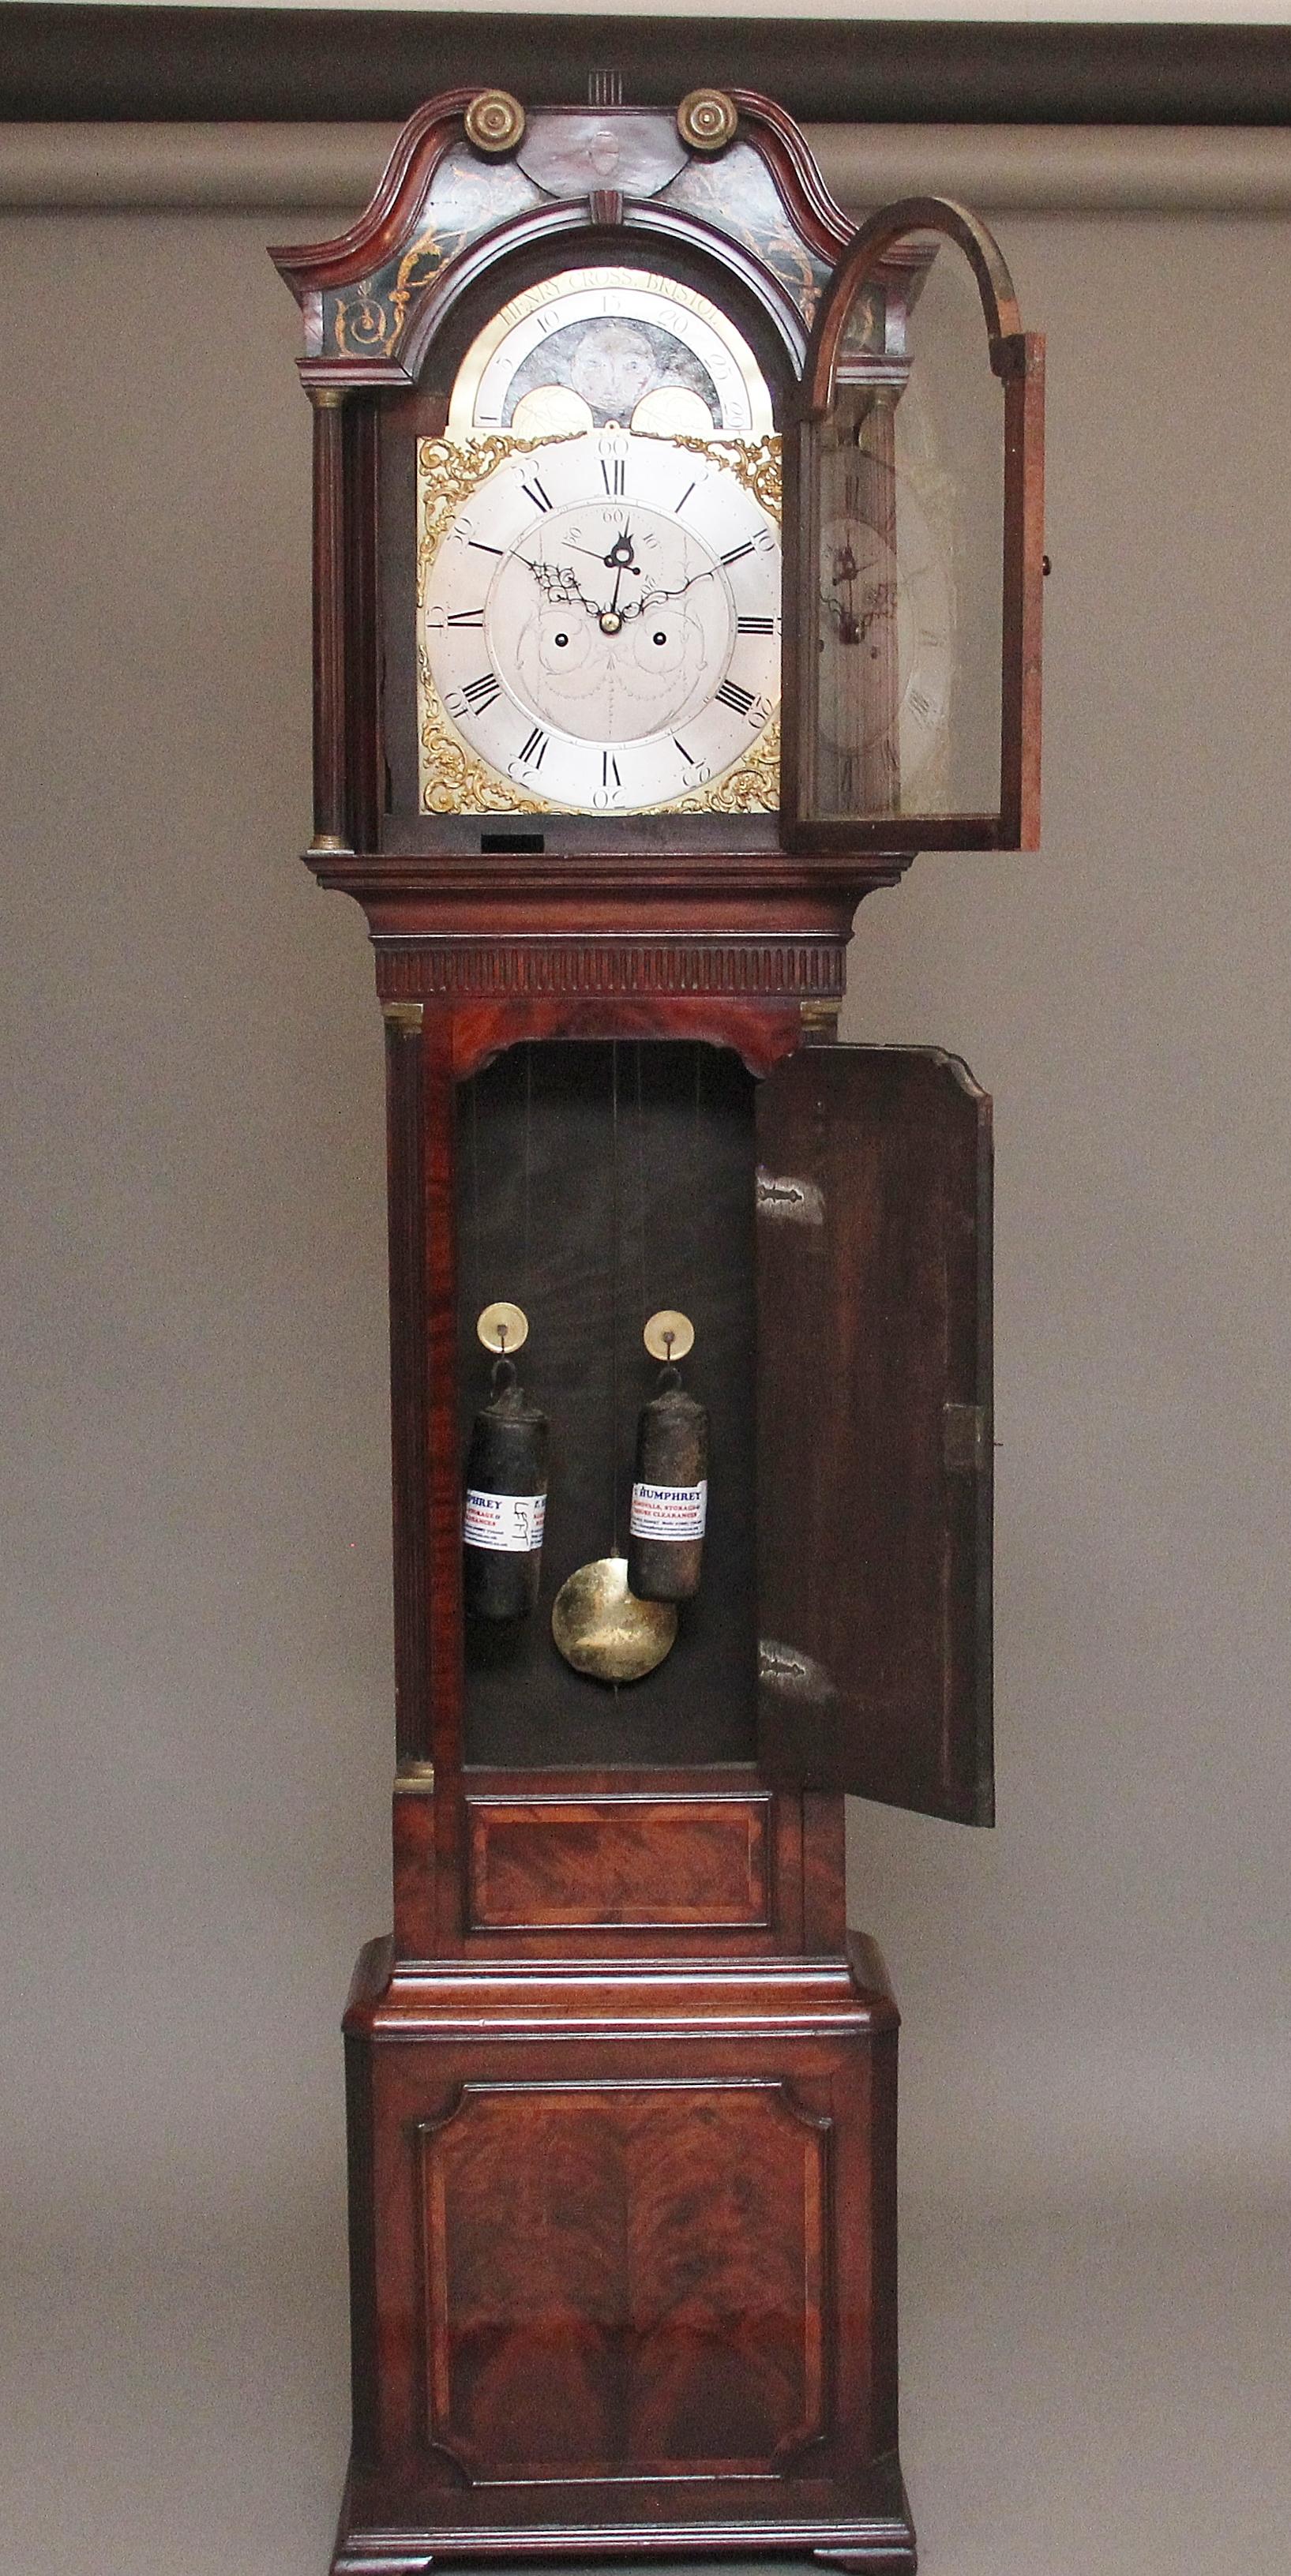 18th Century mahogany eight day long case clock by Henry Cross of Bristol, having a silvered dial arched clock face with a seconds dial, moon roller and calendar, striking on the hour, the movement has been fully restored and cleaned. The clock hood